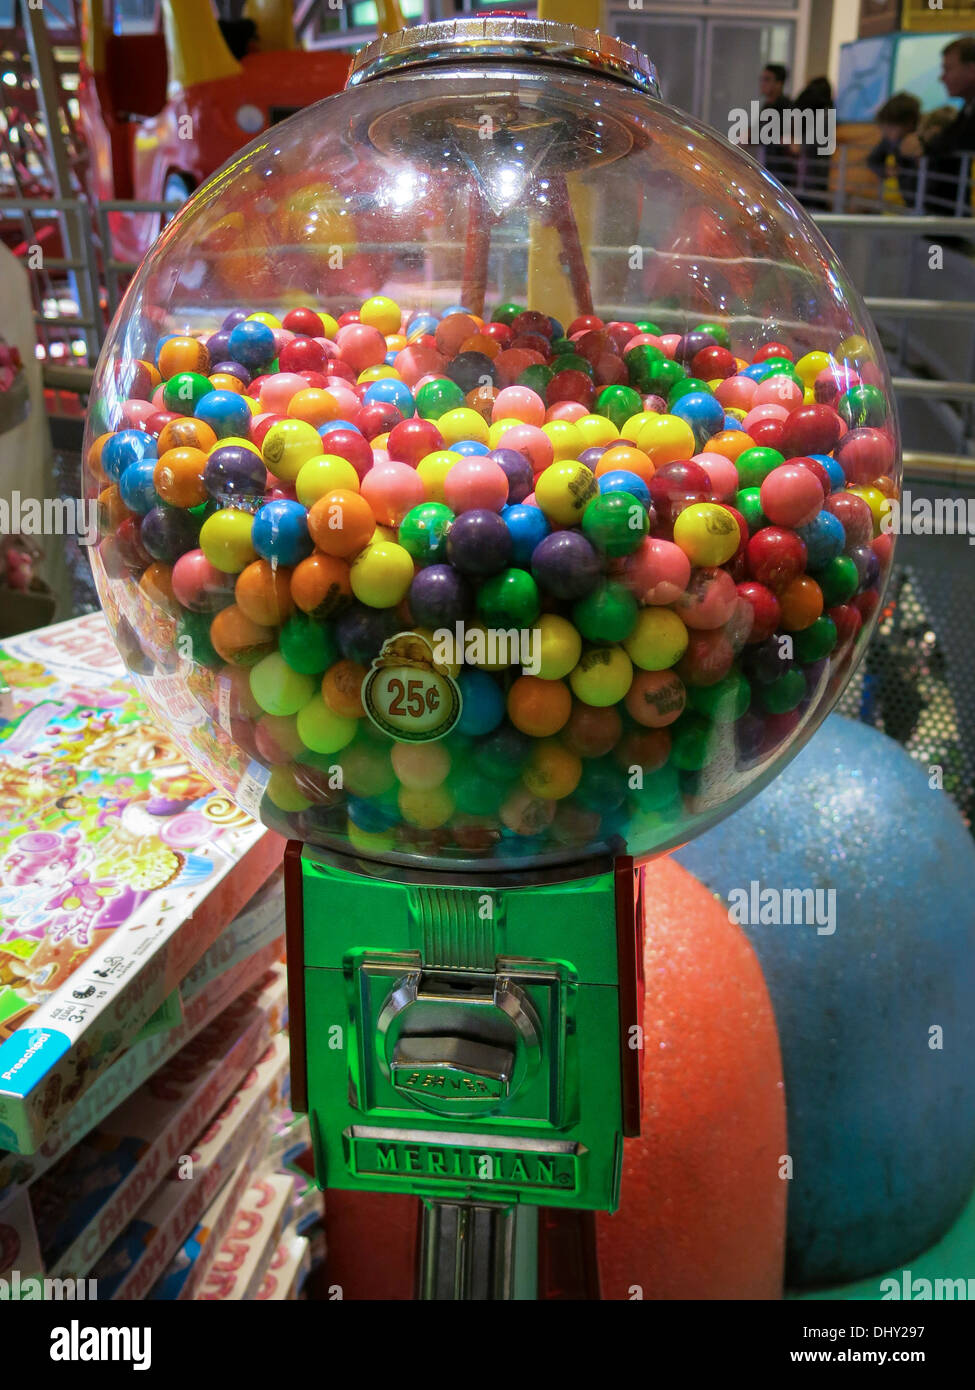 Gumball Machine, Toys R US Store Interieur, Times Square, New York, USA Stockfoto